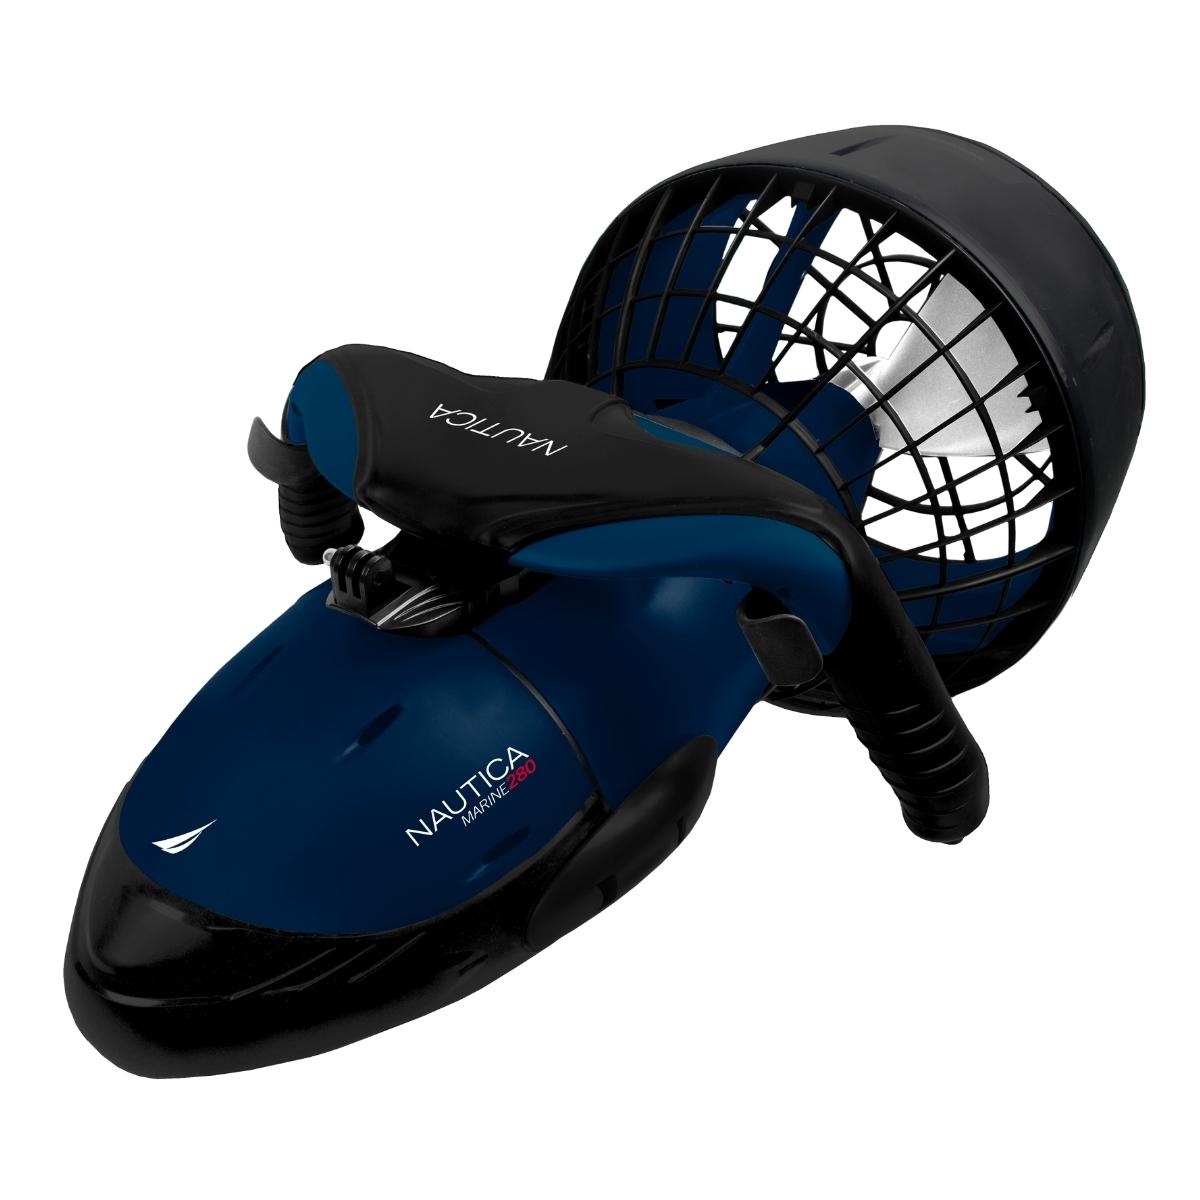 Seascooter Water Electric Nautical Scooter MARINE 280 DPV